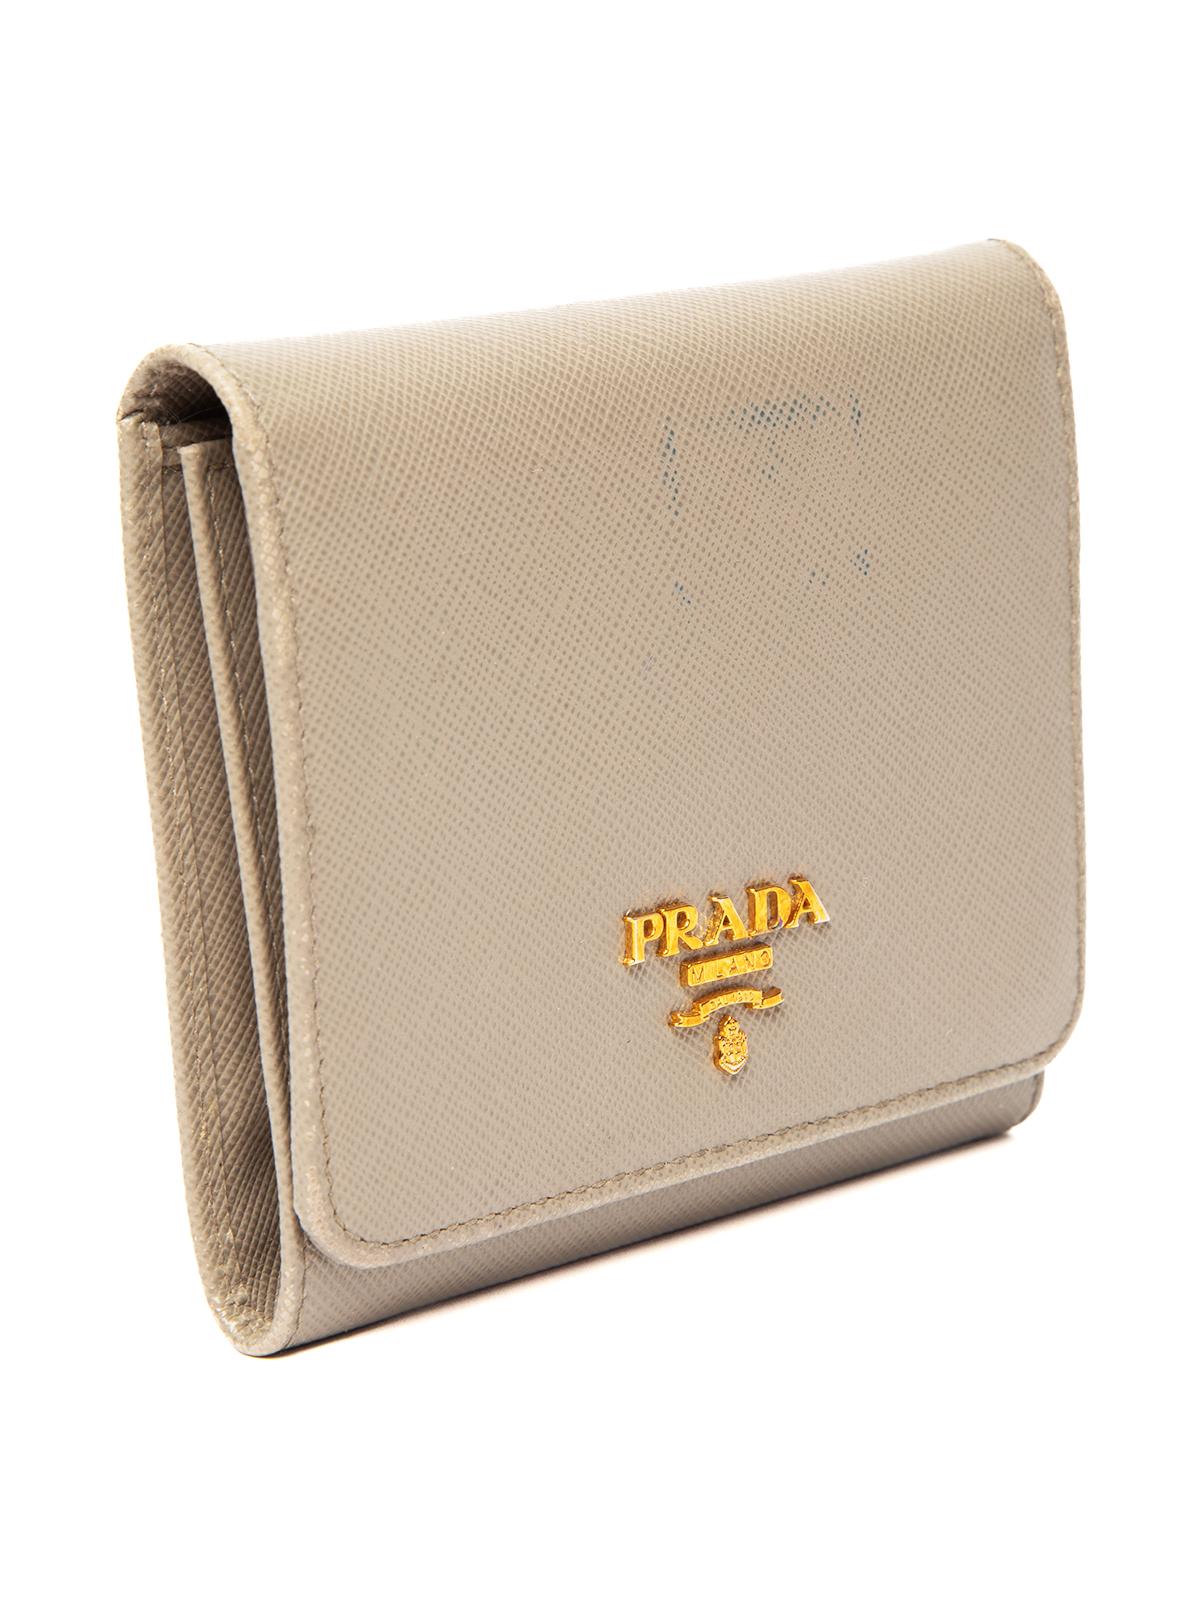 CONDITION is Good. Some wear to wallet is evident. A few small blue stains in the front, one subtle scratch in the back, one loose thread on the inside on this used Stella McCartney designer resale item. Details Fold wallet 8 card compartments Coin